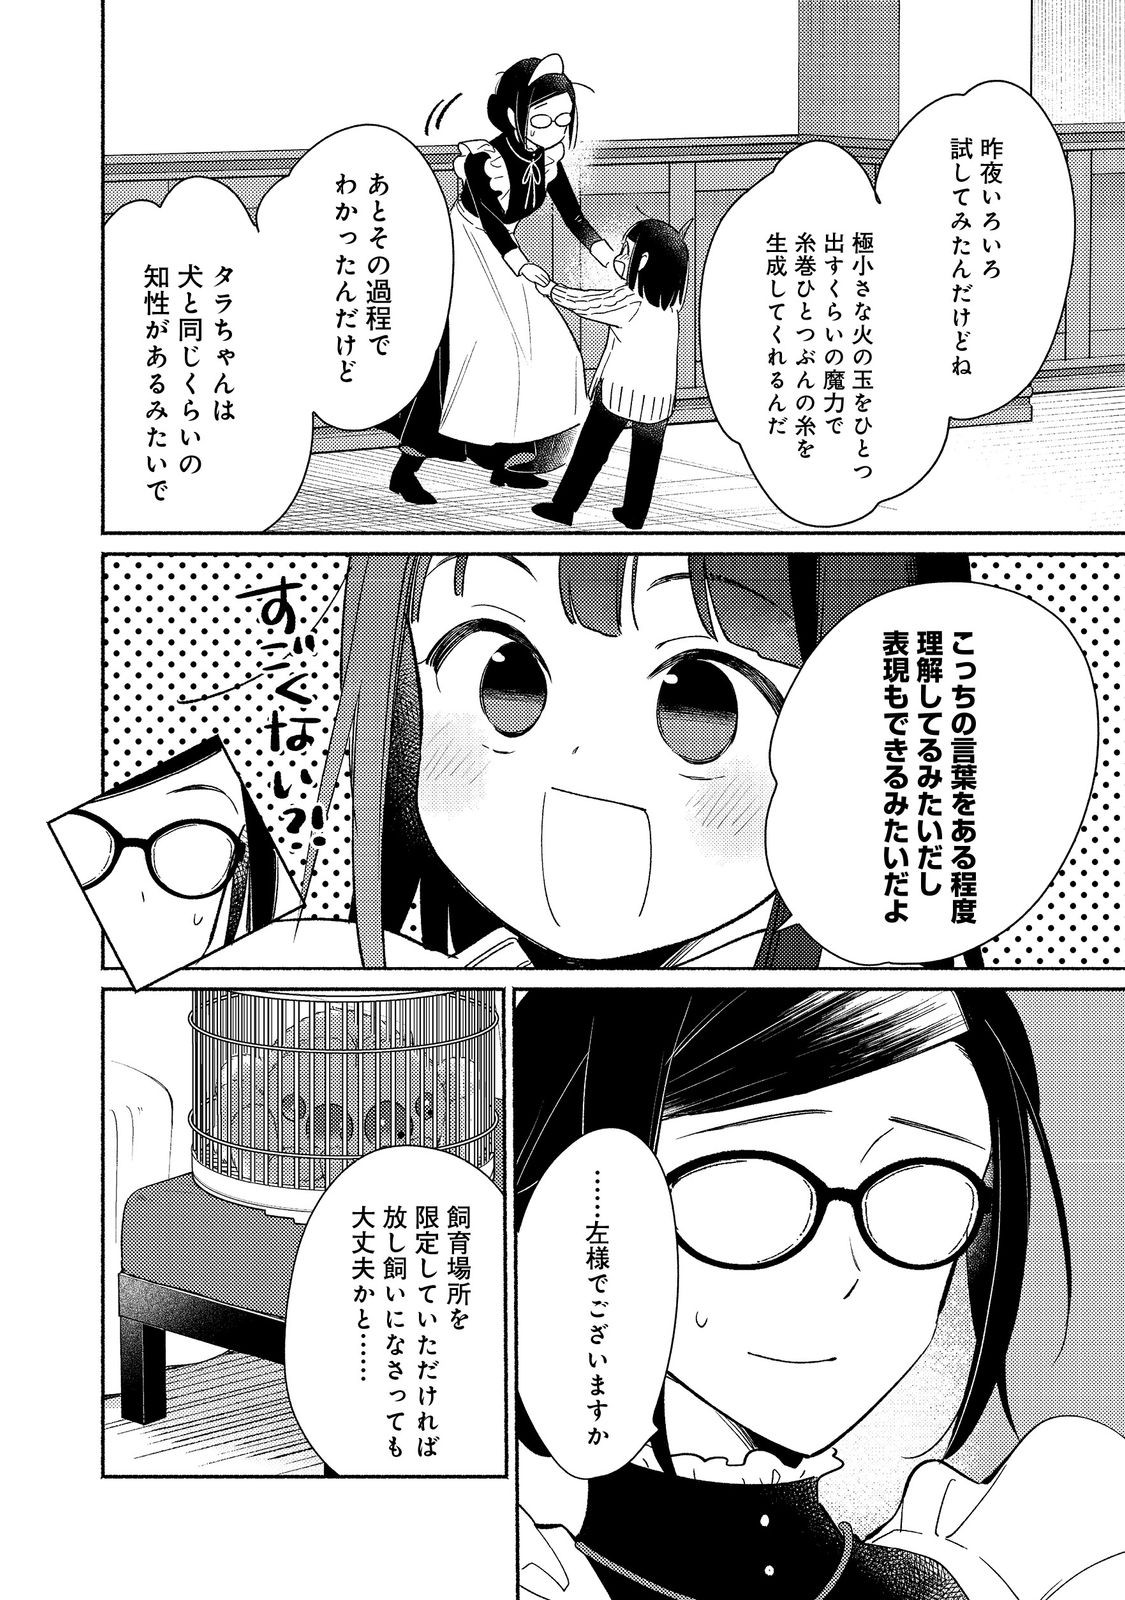 I’m the White Pig Nobleman 第27.1話 - Page 4